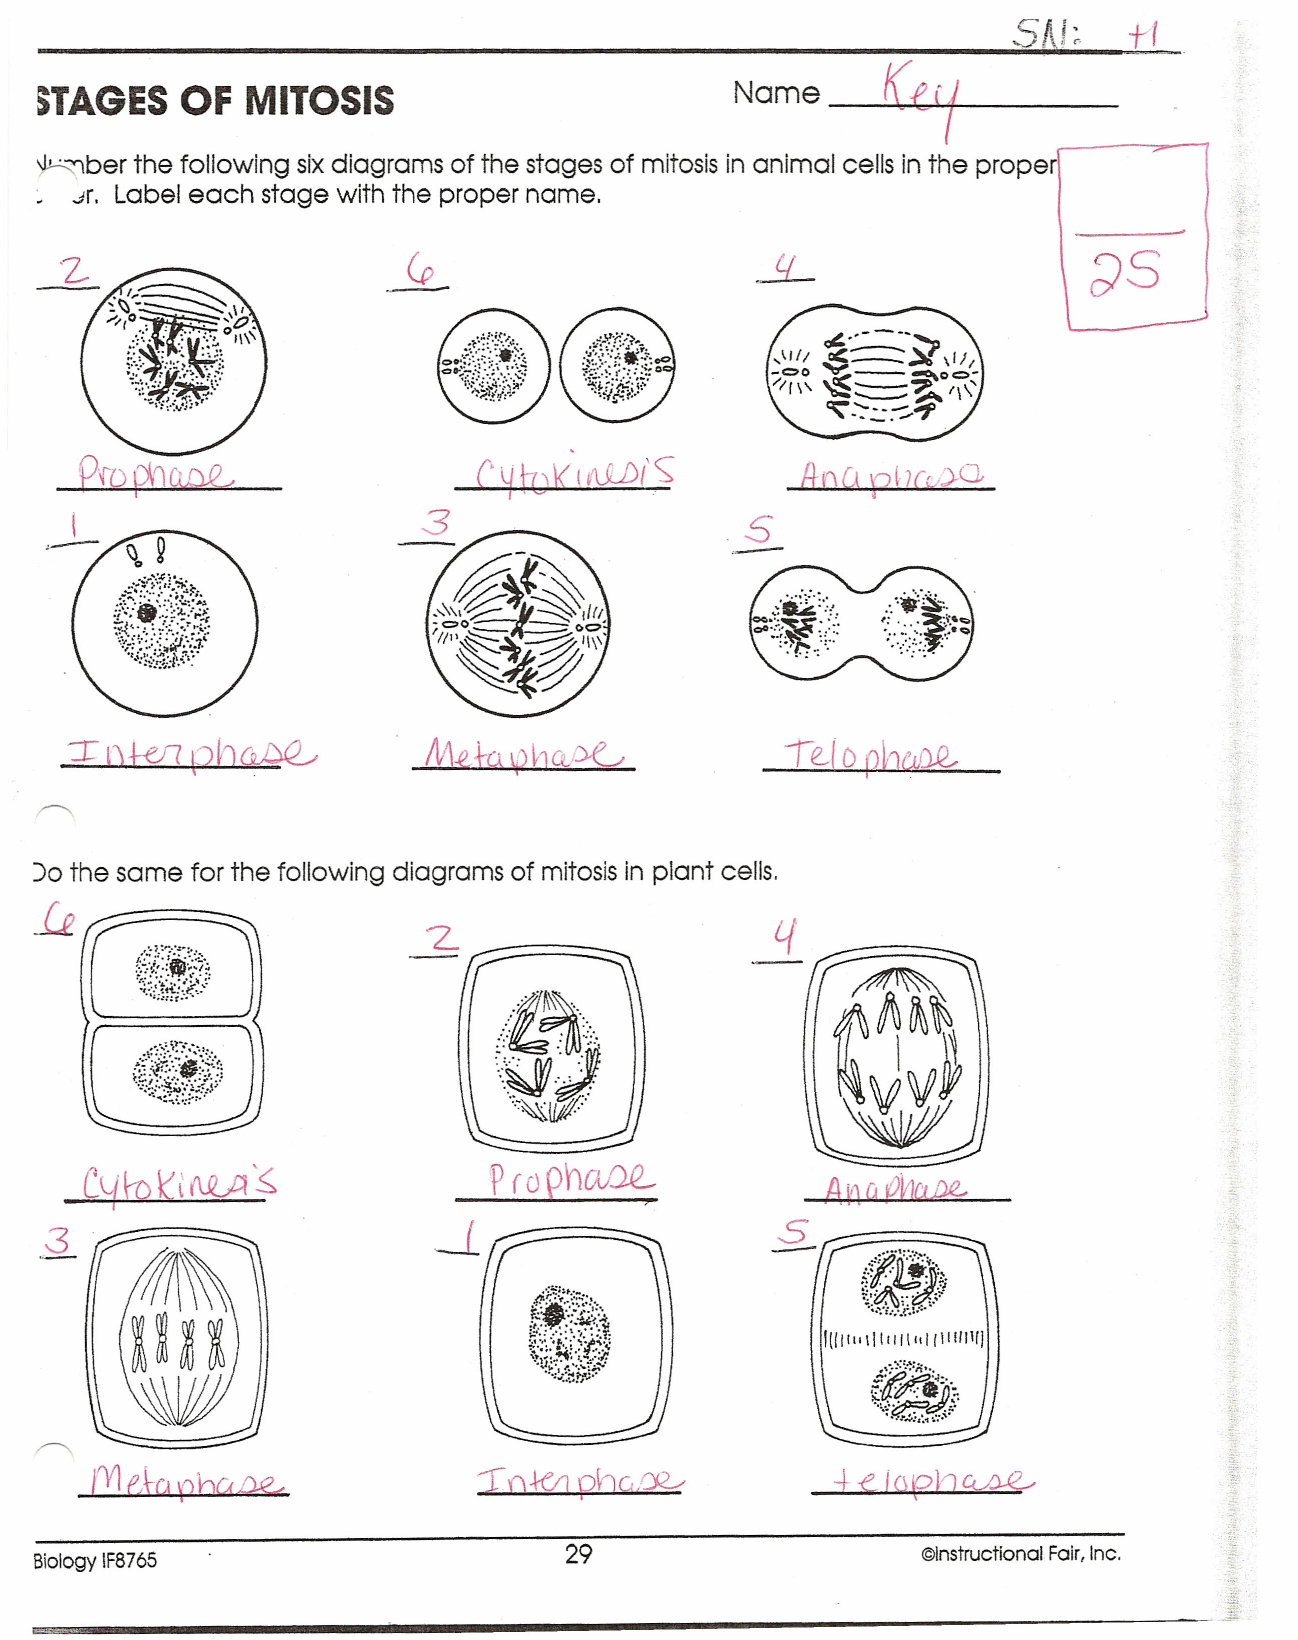 Stages Of Mitosis For Phases Of Meiosis Worksheet